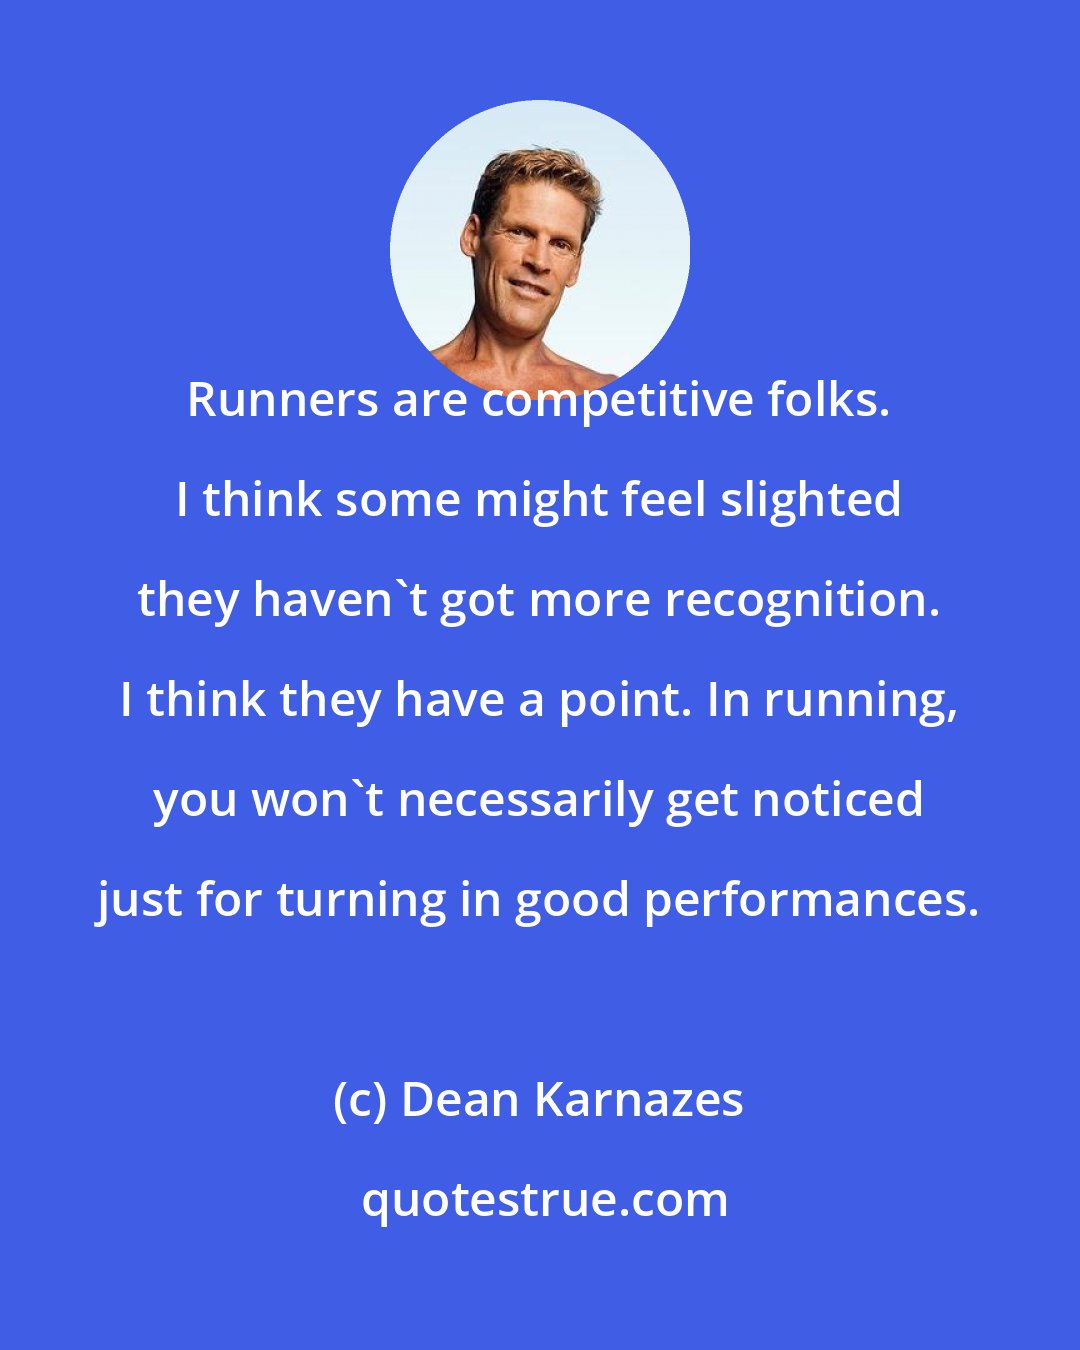 Dean Karnazes: Runners are competitive folks. I think some might feel slighted they haven't got more recognition. I think they have a point. In running, you won't necessarily get noticed just for turning in good performances.